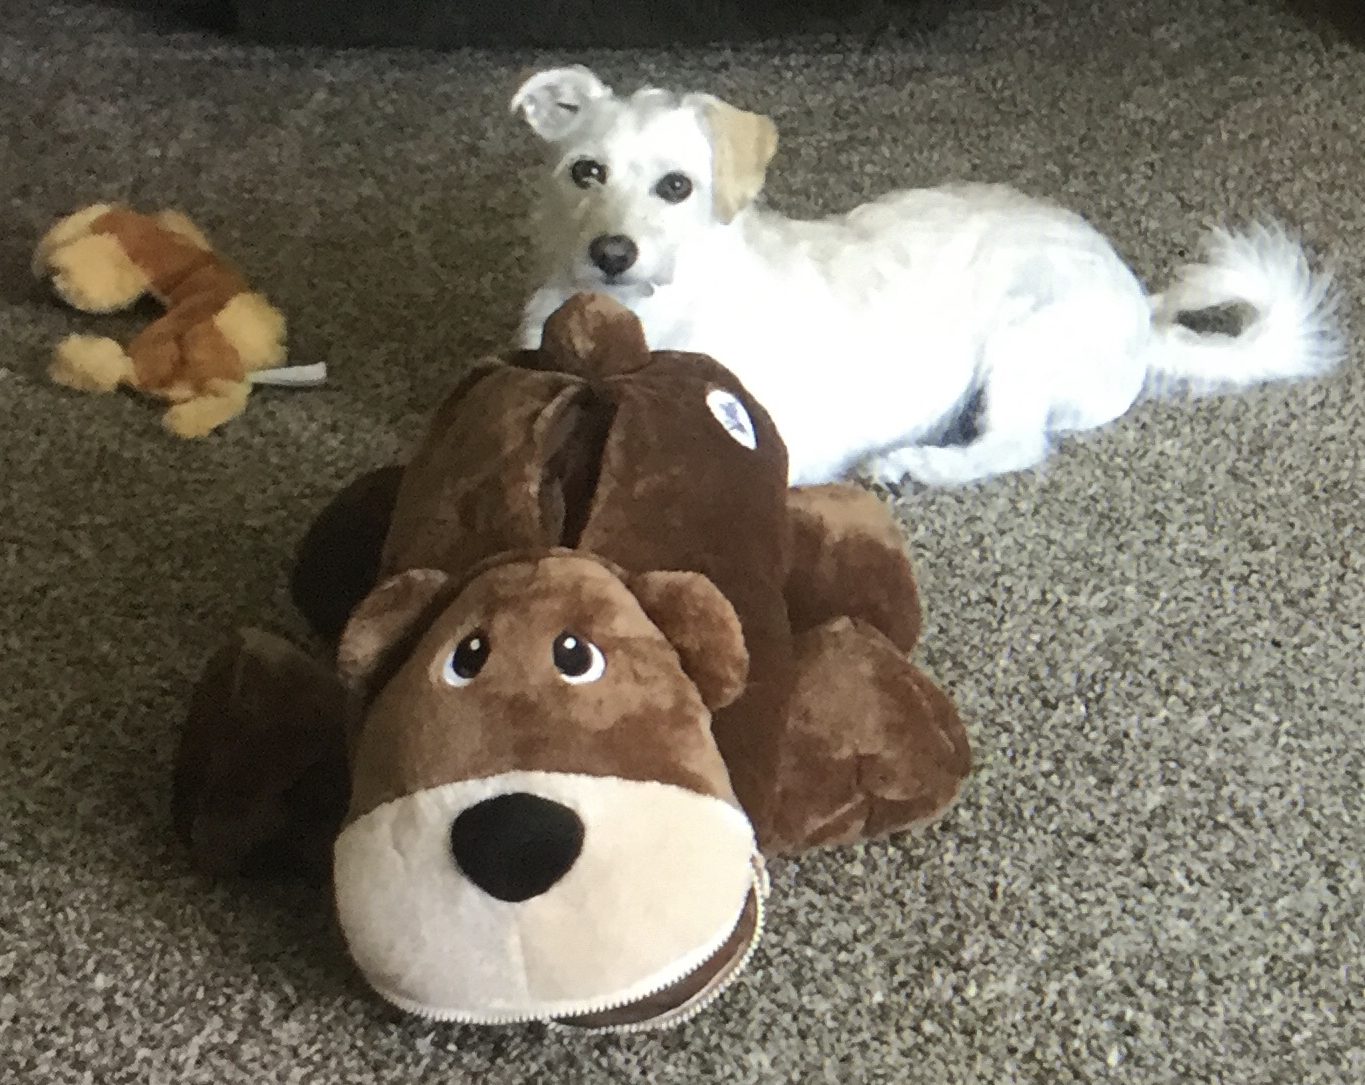 photo of eddie a cute jack russell terrier dog in Sherman texas that is available for adoption. Eddie poses with his stuffed animals, one of which is 10 sizes bigger than he is.